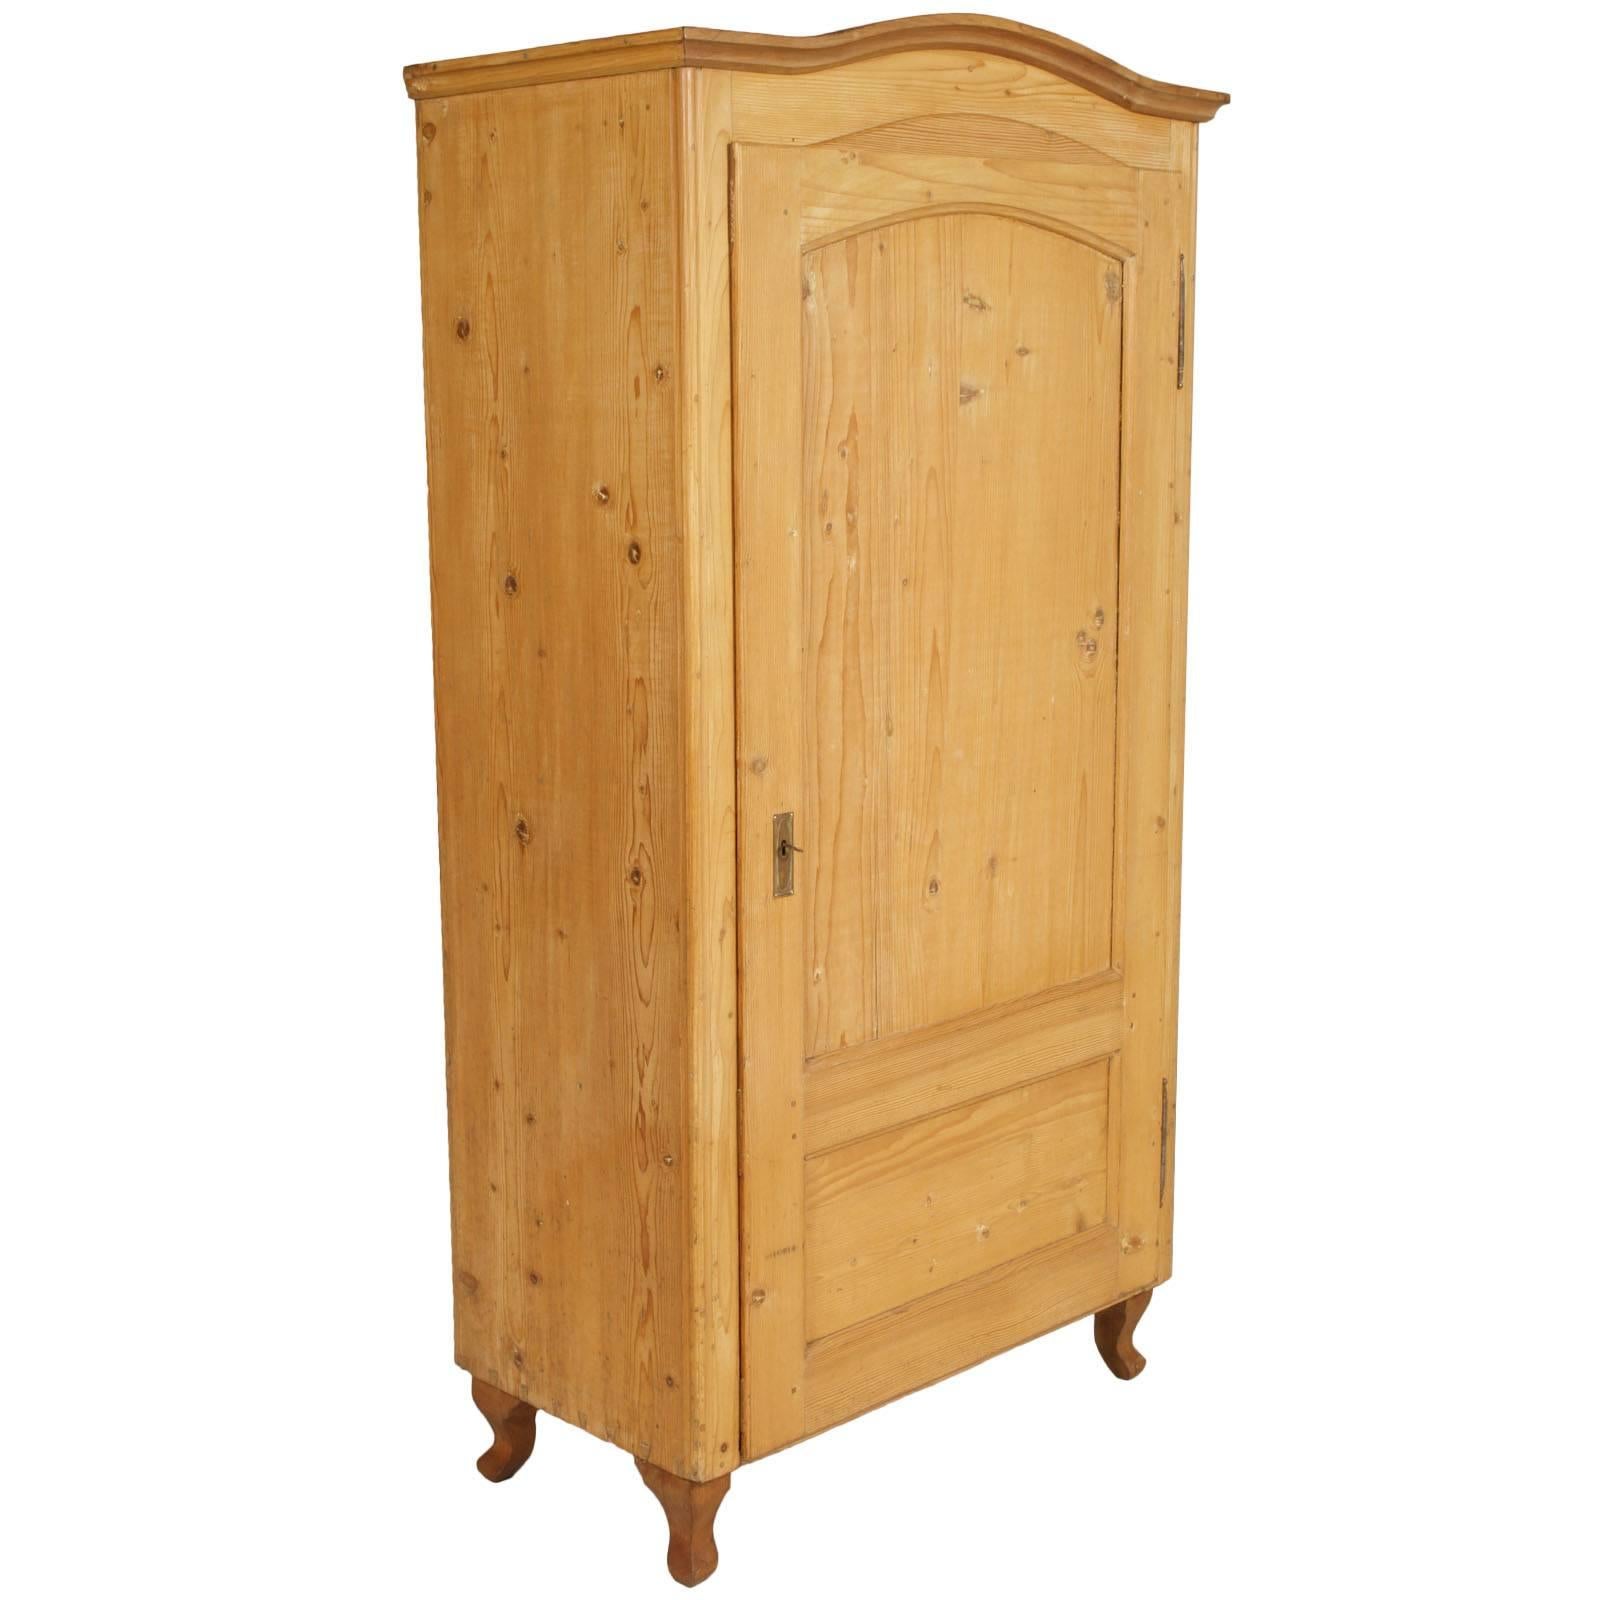 Late 18th Century Wardrobe Armoire Cupboard, in Bleached Larch, Wax Polished